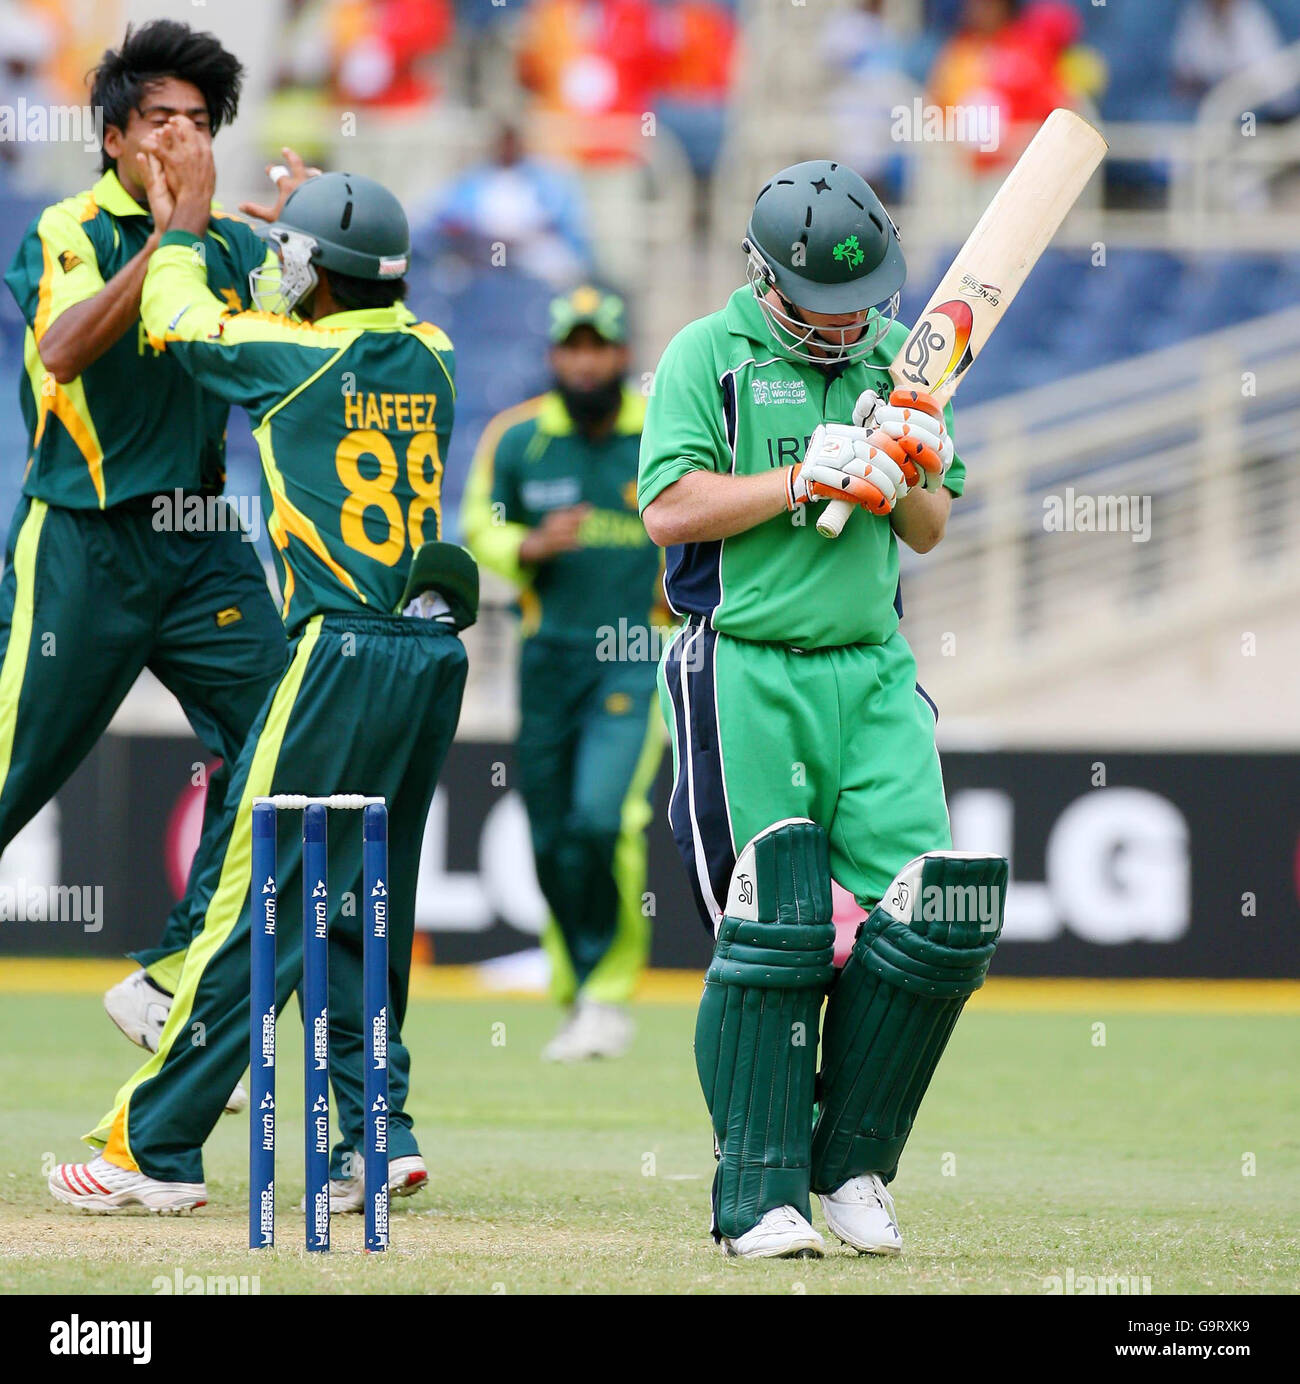 Ireland S Eoin Morgan Right Leaves The Field After Losing His Wicket To Pakistan S Mohammed Sami Left During The Icc Cricket World Cup 2007 Group C Match At Sabina Park Kingston Jamaica Stock